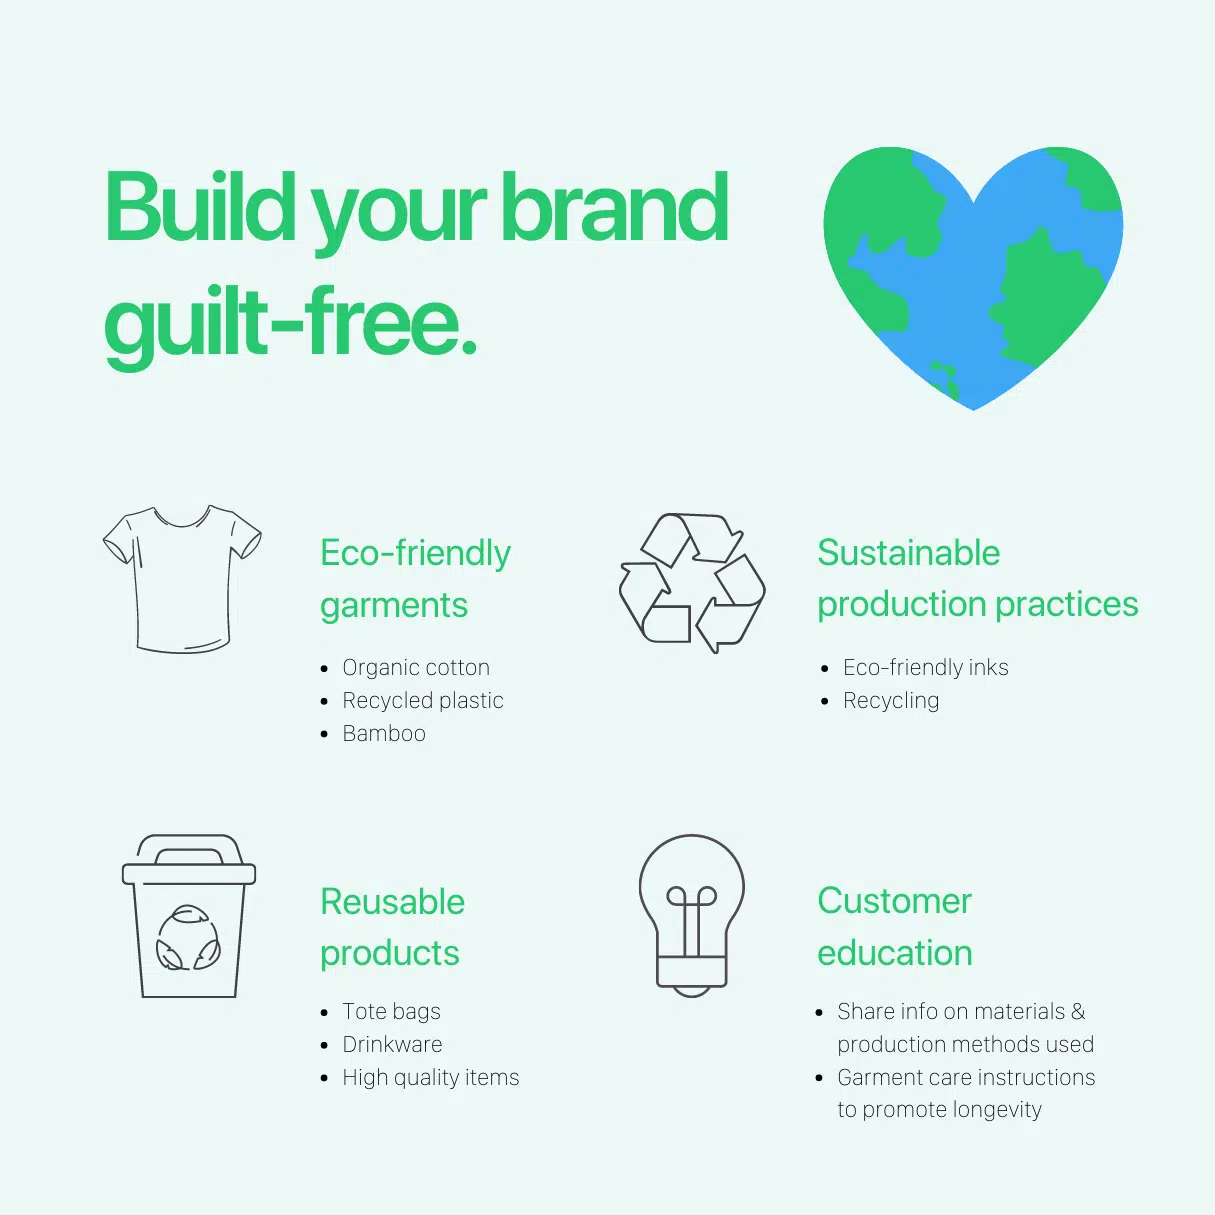 Graphic showing key tips to building your brand guilt-free.